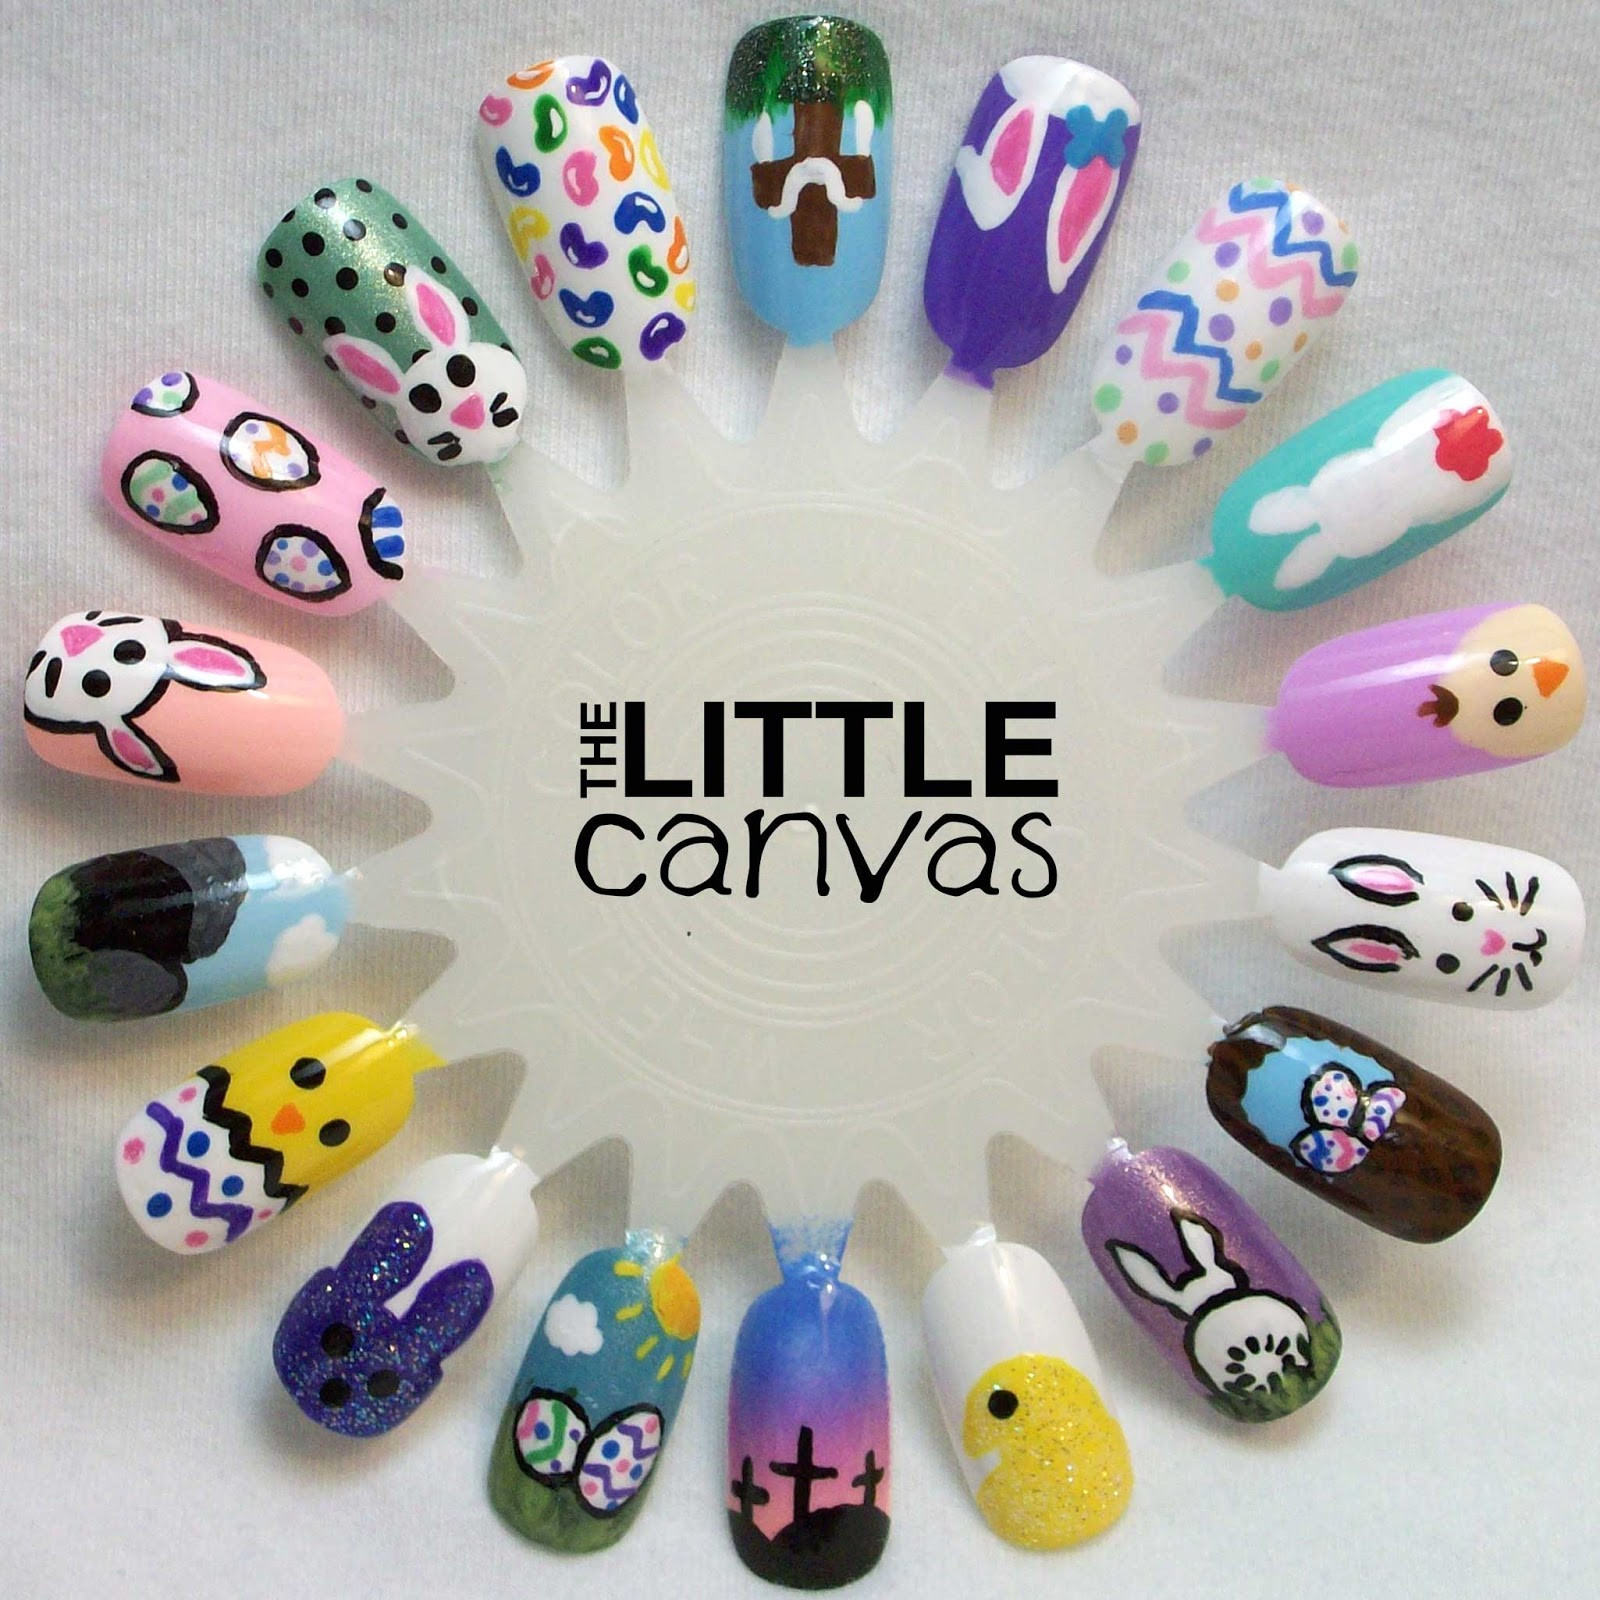 Nail Art Wheel
 The e With the Easter Nail Art Wheel The Little Canvas